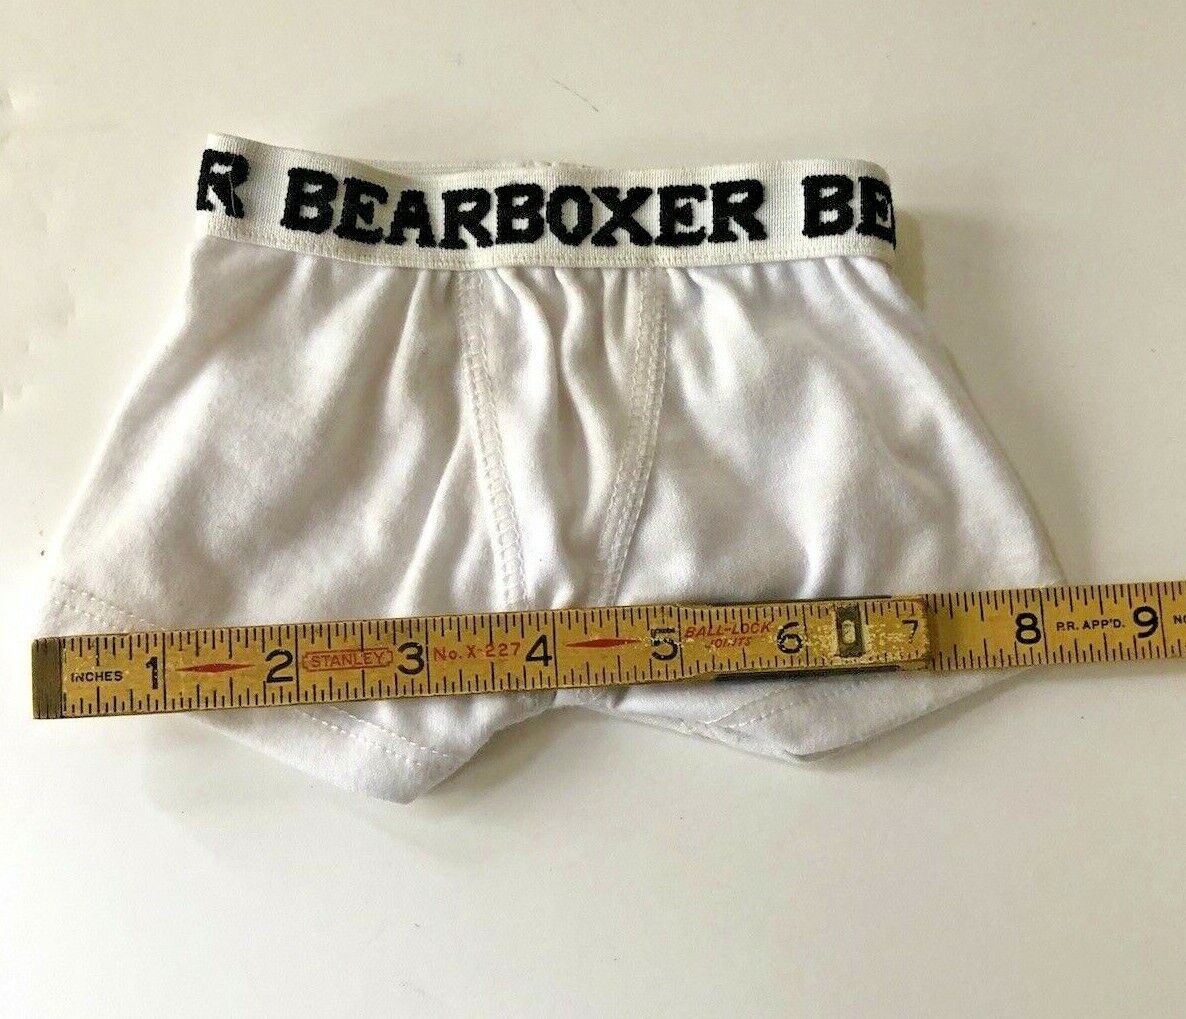 Build a Bear BearBoxer Underwear Full Size Teddy Bear Clothing White Boxers